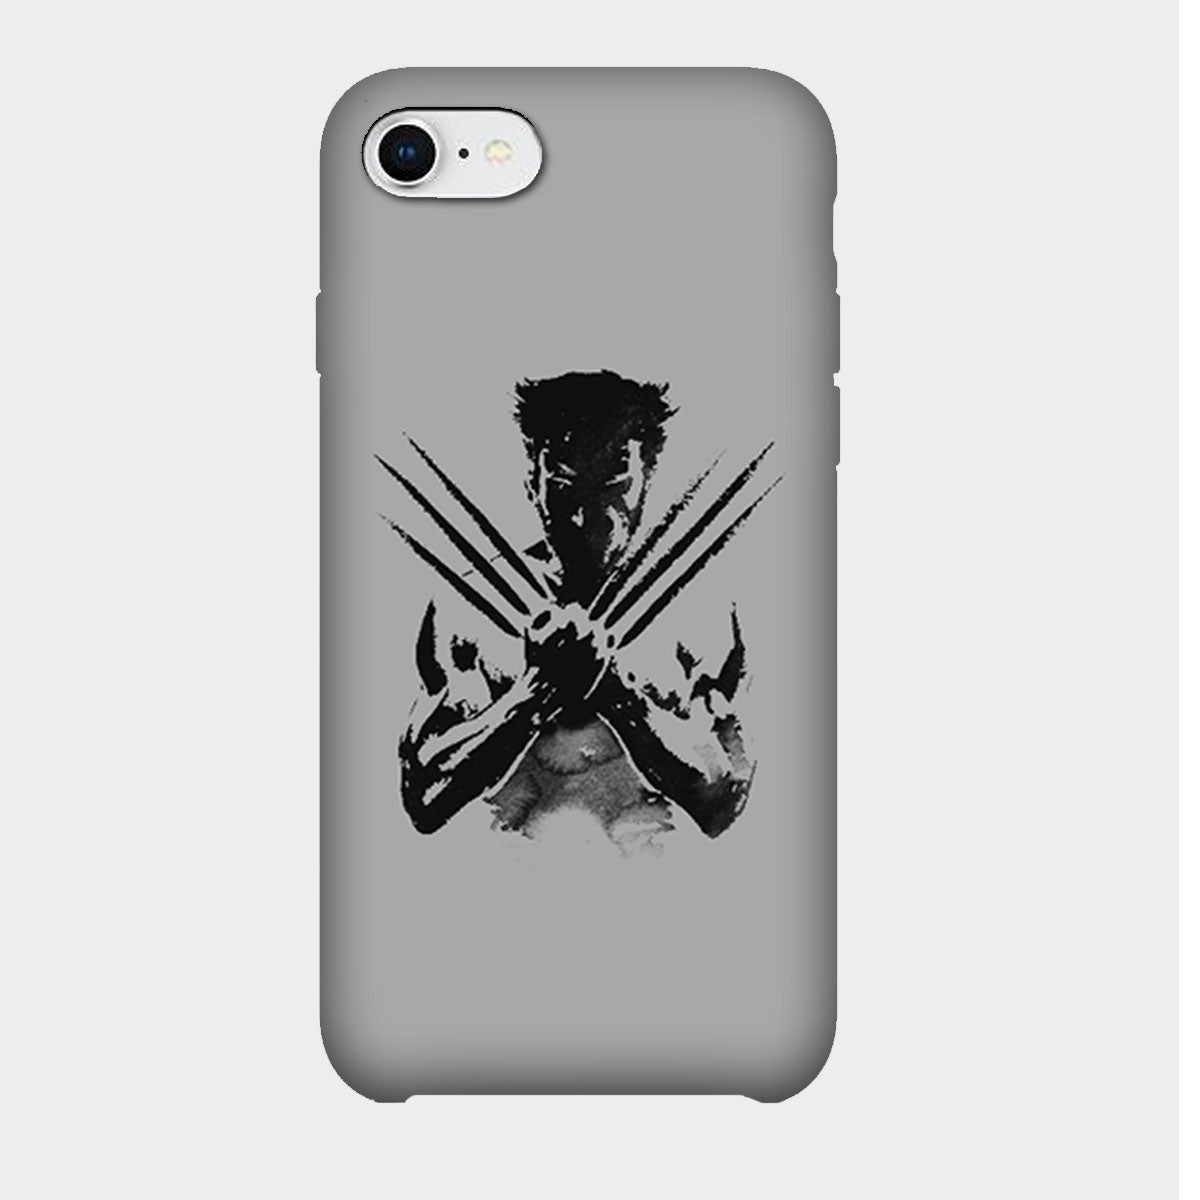 Wolverine - Mobile Phone Cover - Hard Case